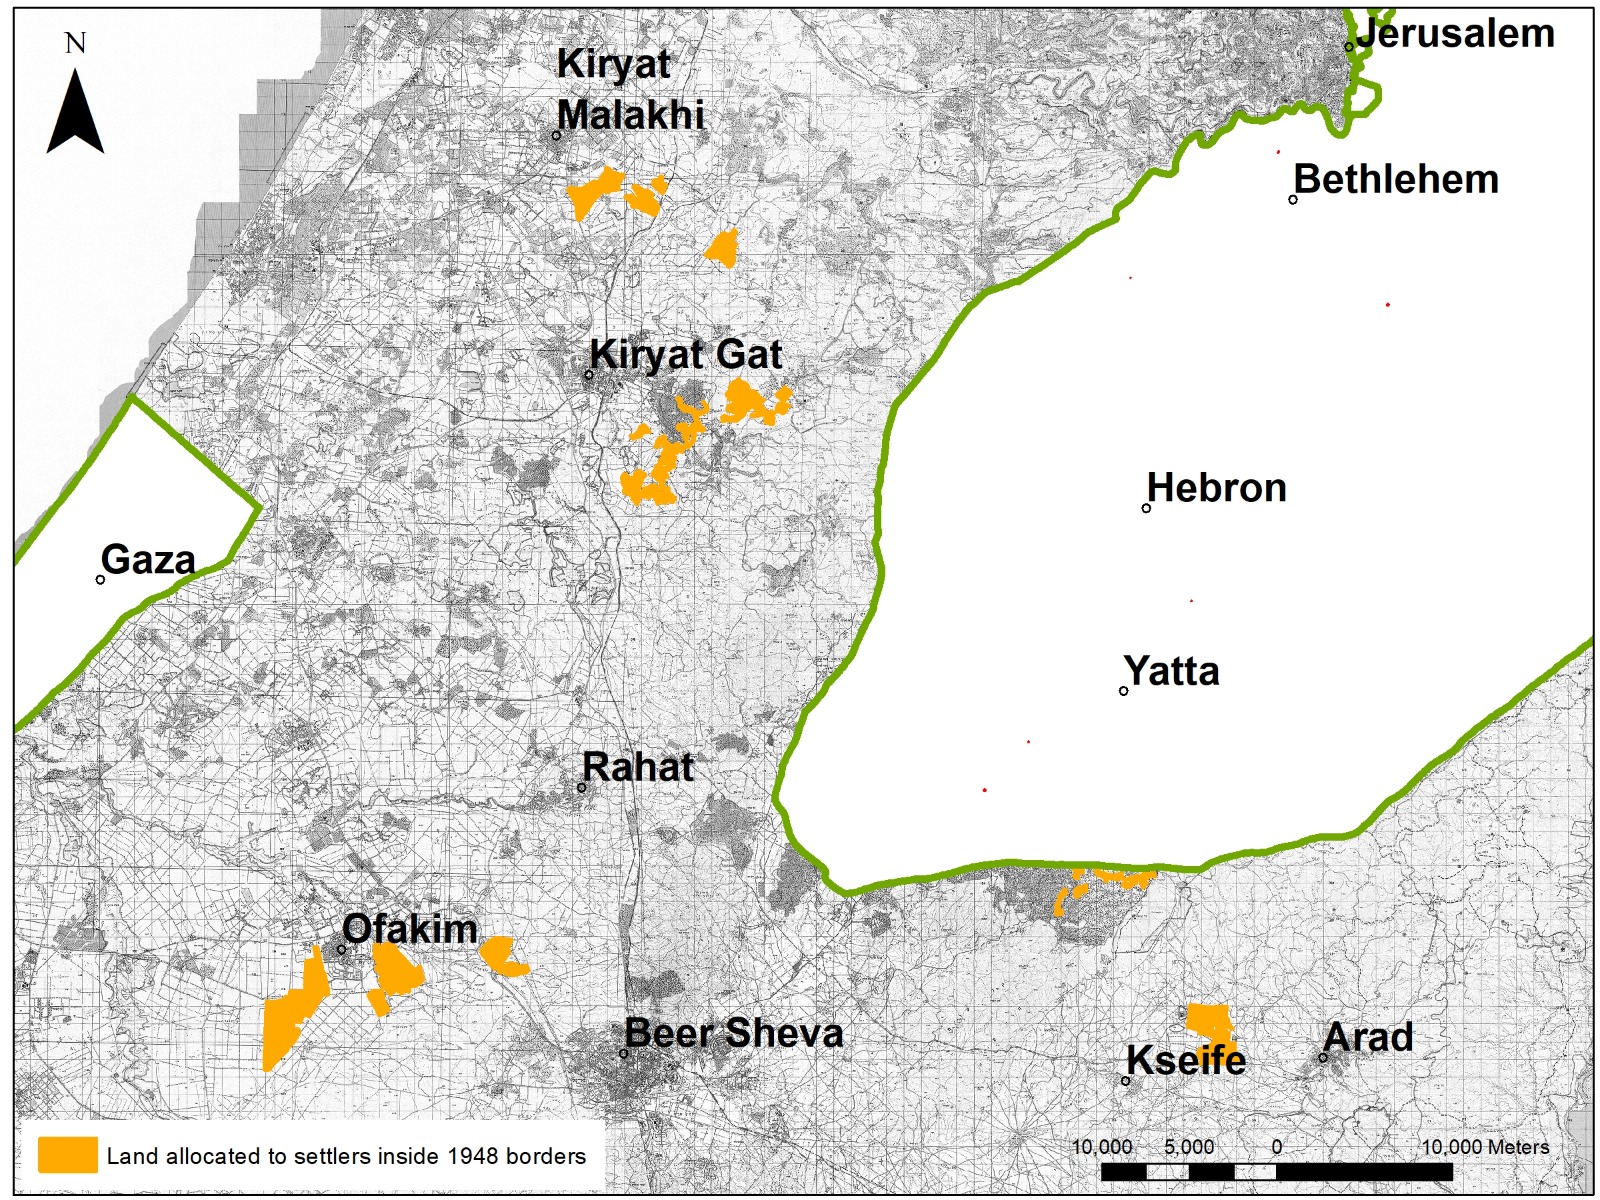 Map of land allocated by the state to settlers in the West Bank inside Israel. (Map courtesy of Dror Etkes)